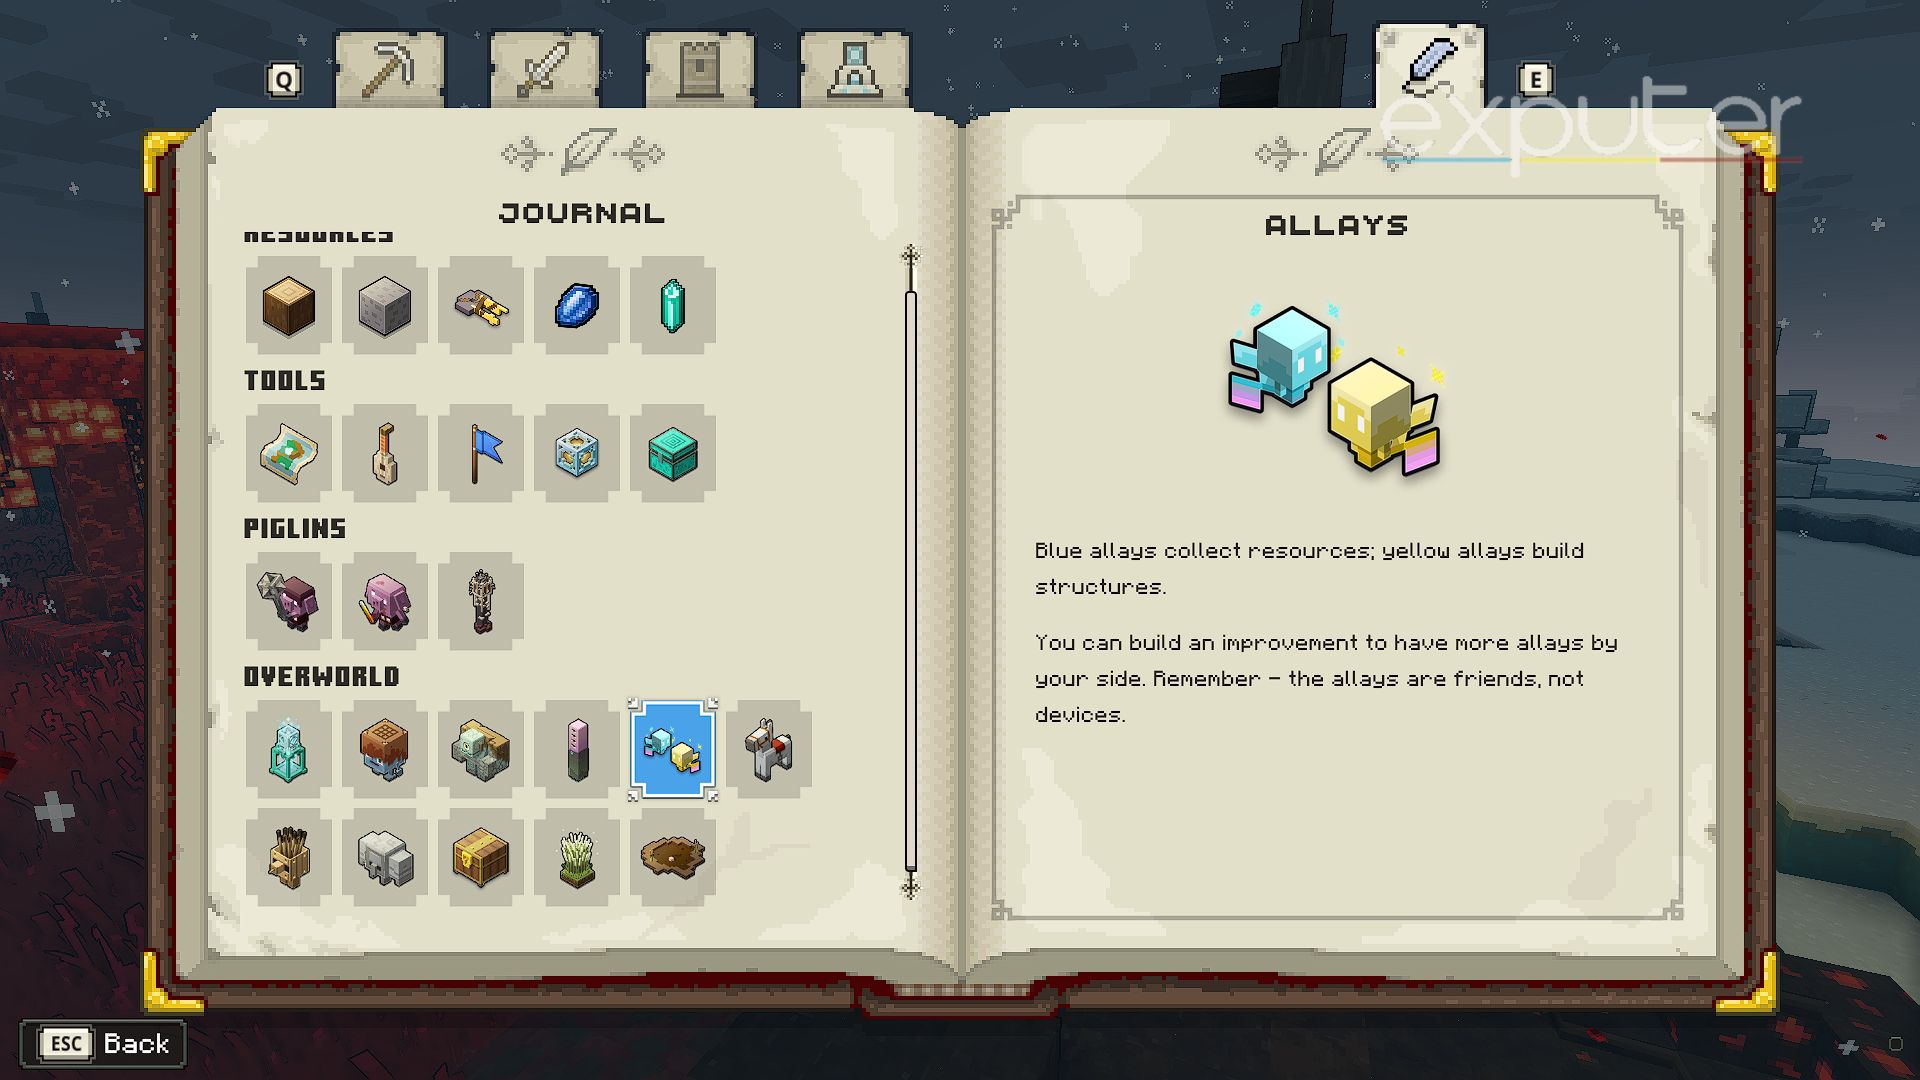 Allays in Minecraft Legends are helping creatures.